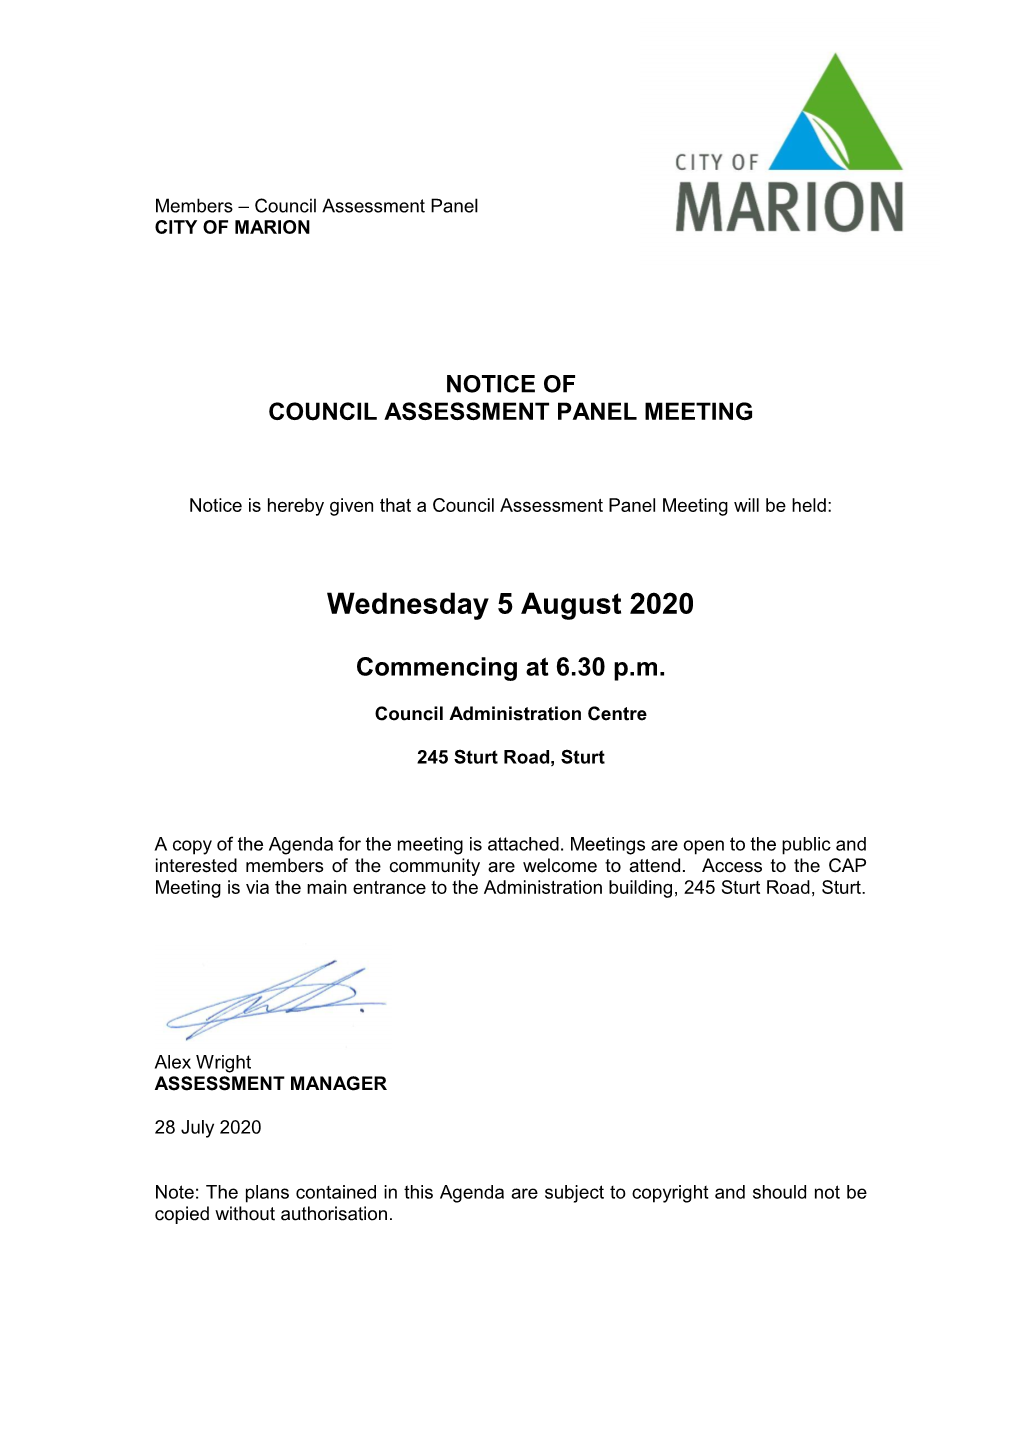 Notice of Council Assessment Panel Meeting